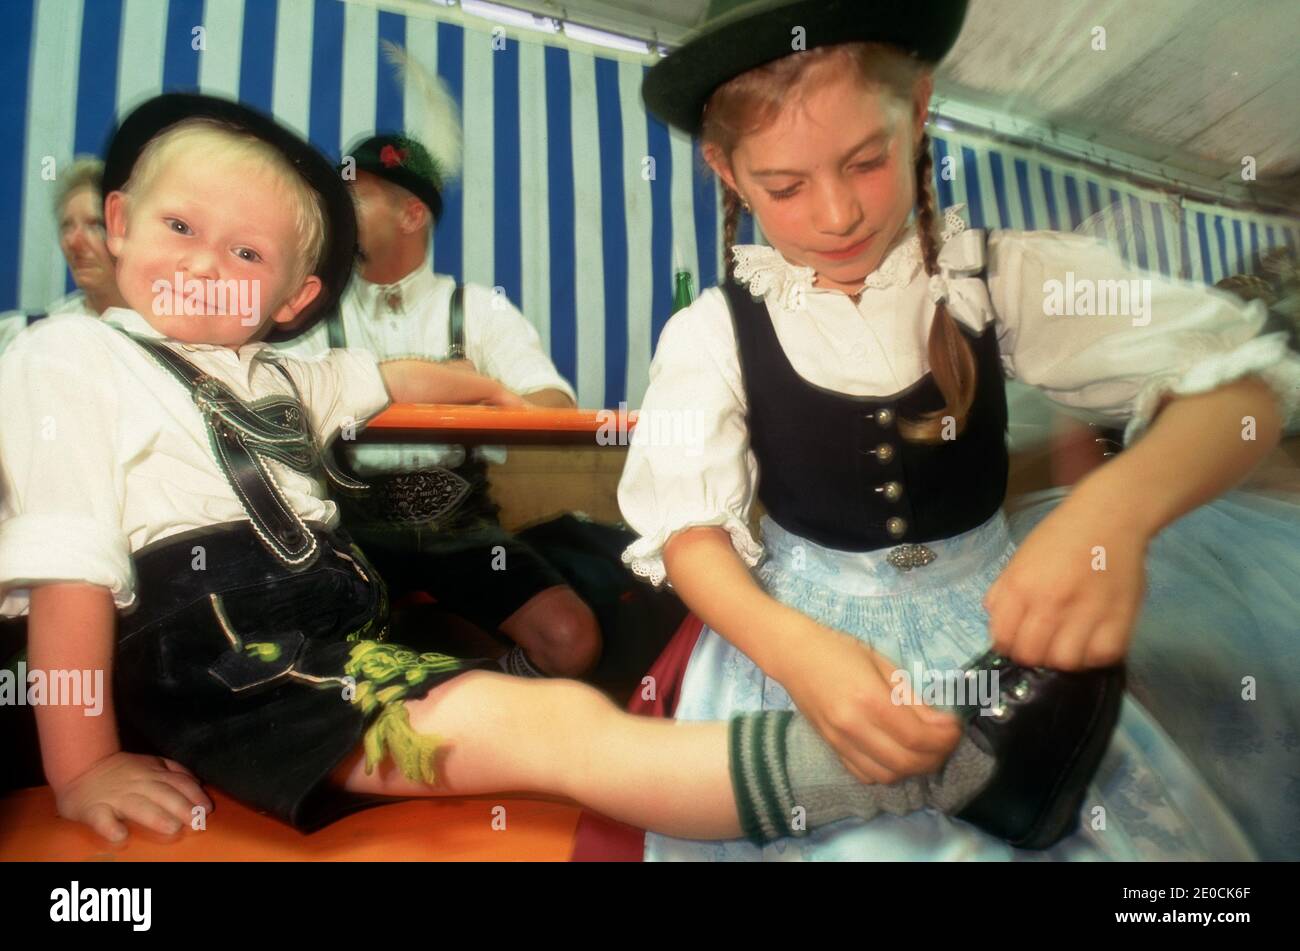 Germany /Bavaria /Young boy in Lederhose is posing with a girl closing his shoe laces . Stock Photo